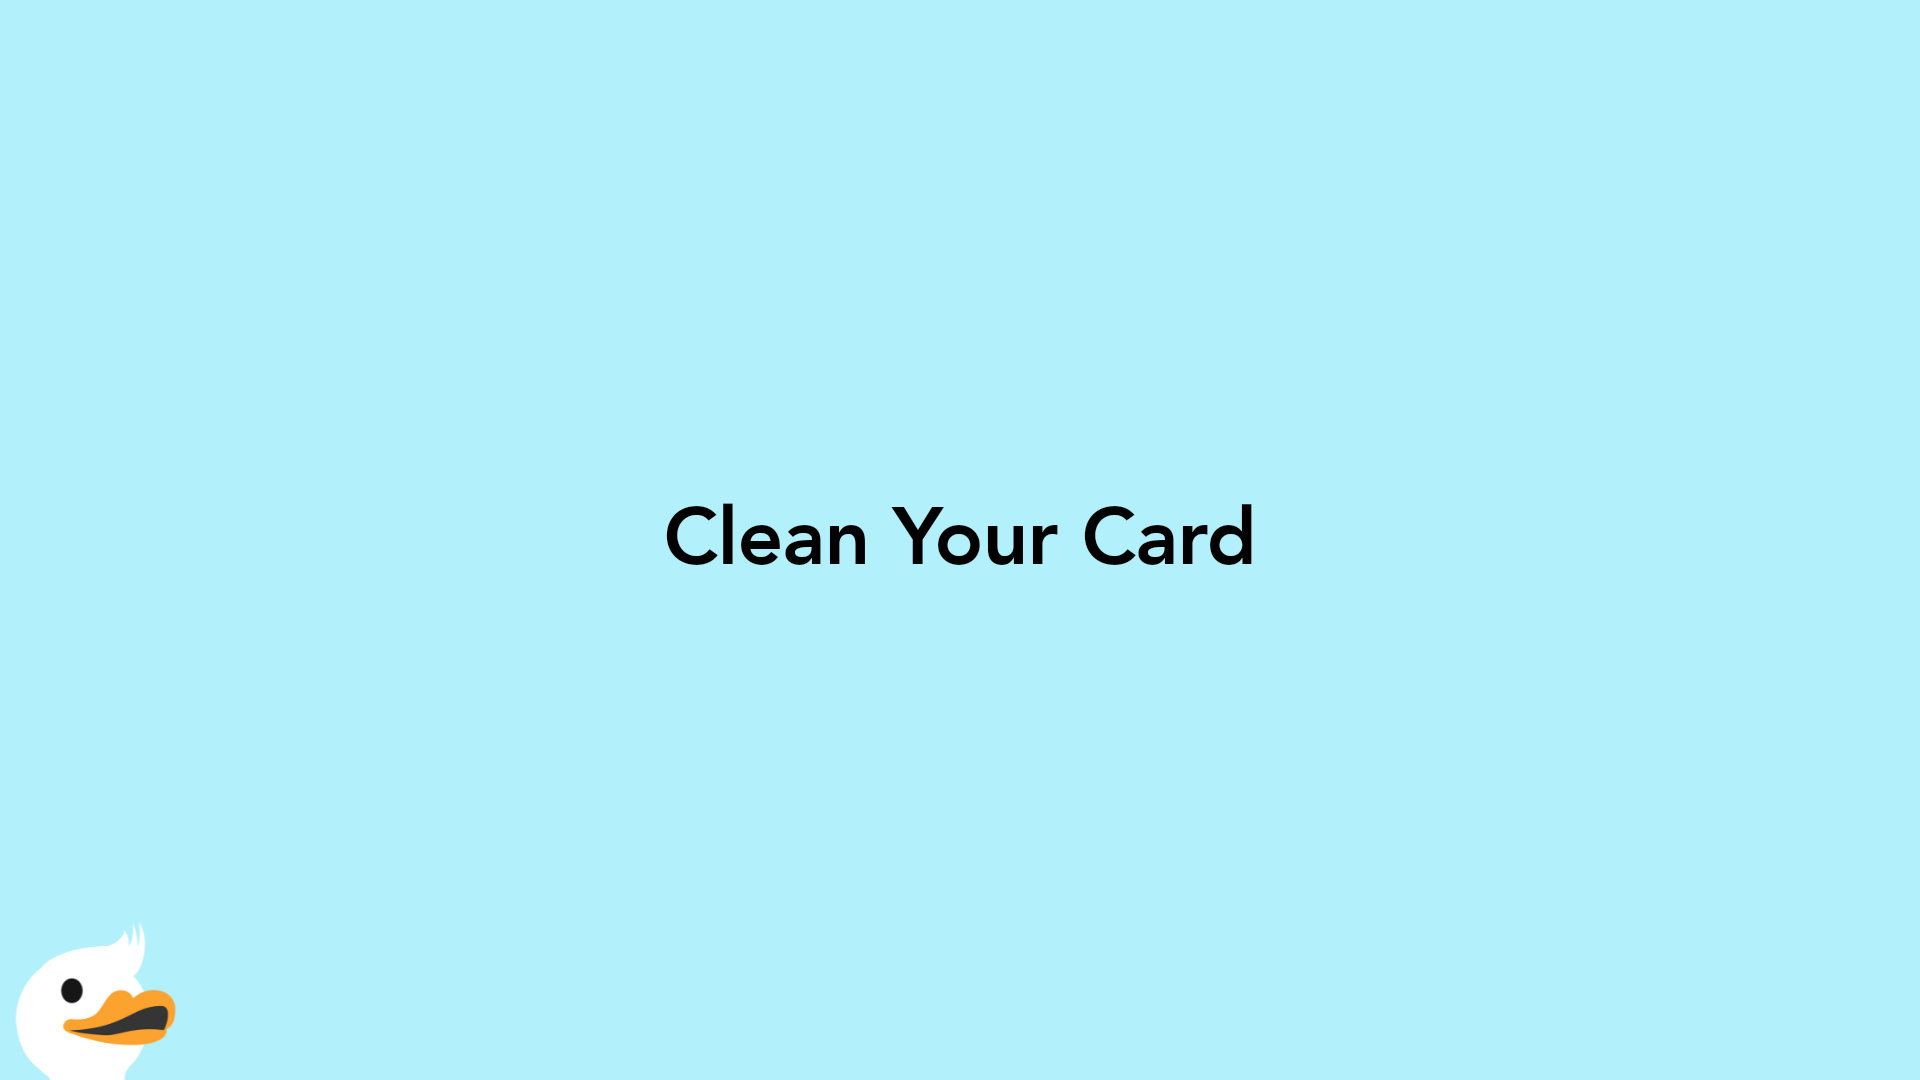 Clean Your Card